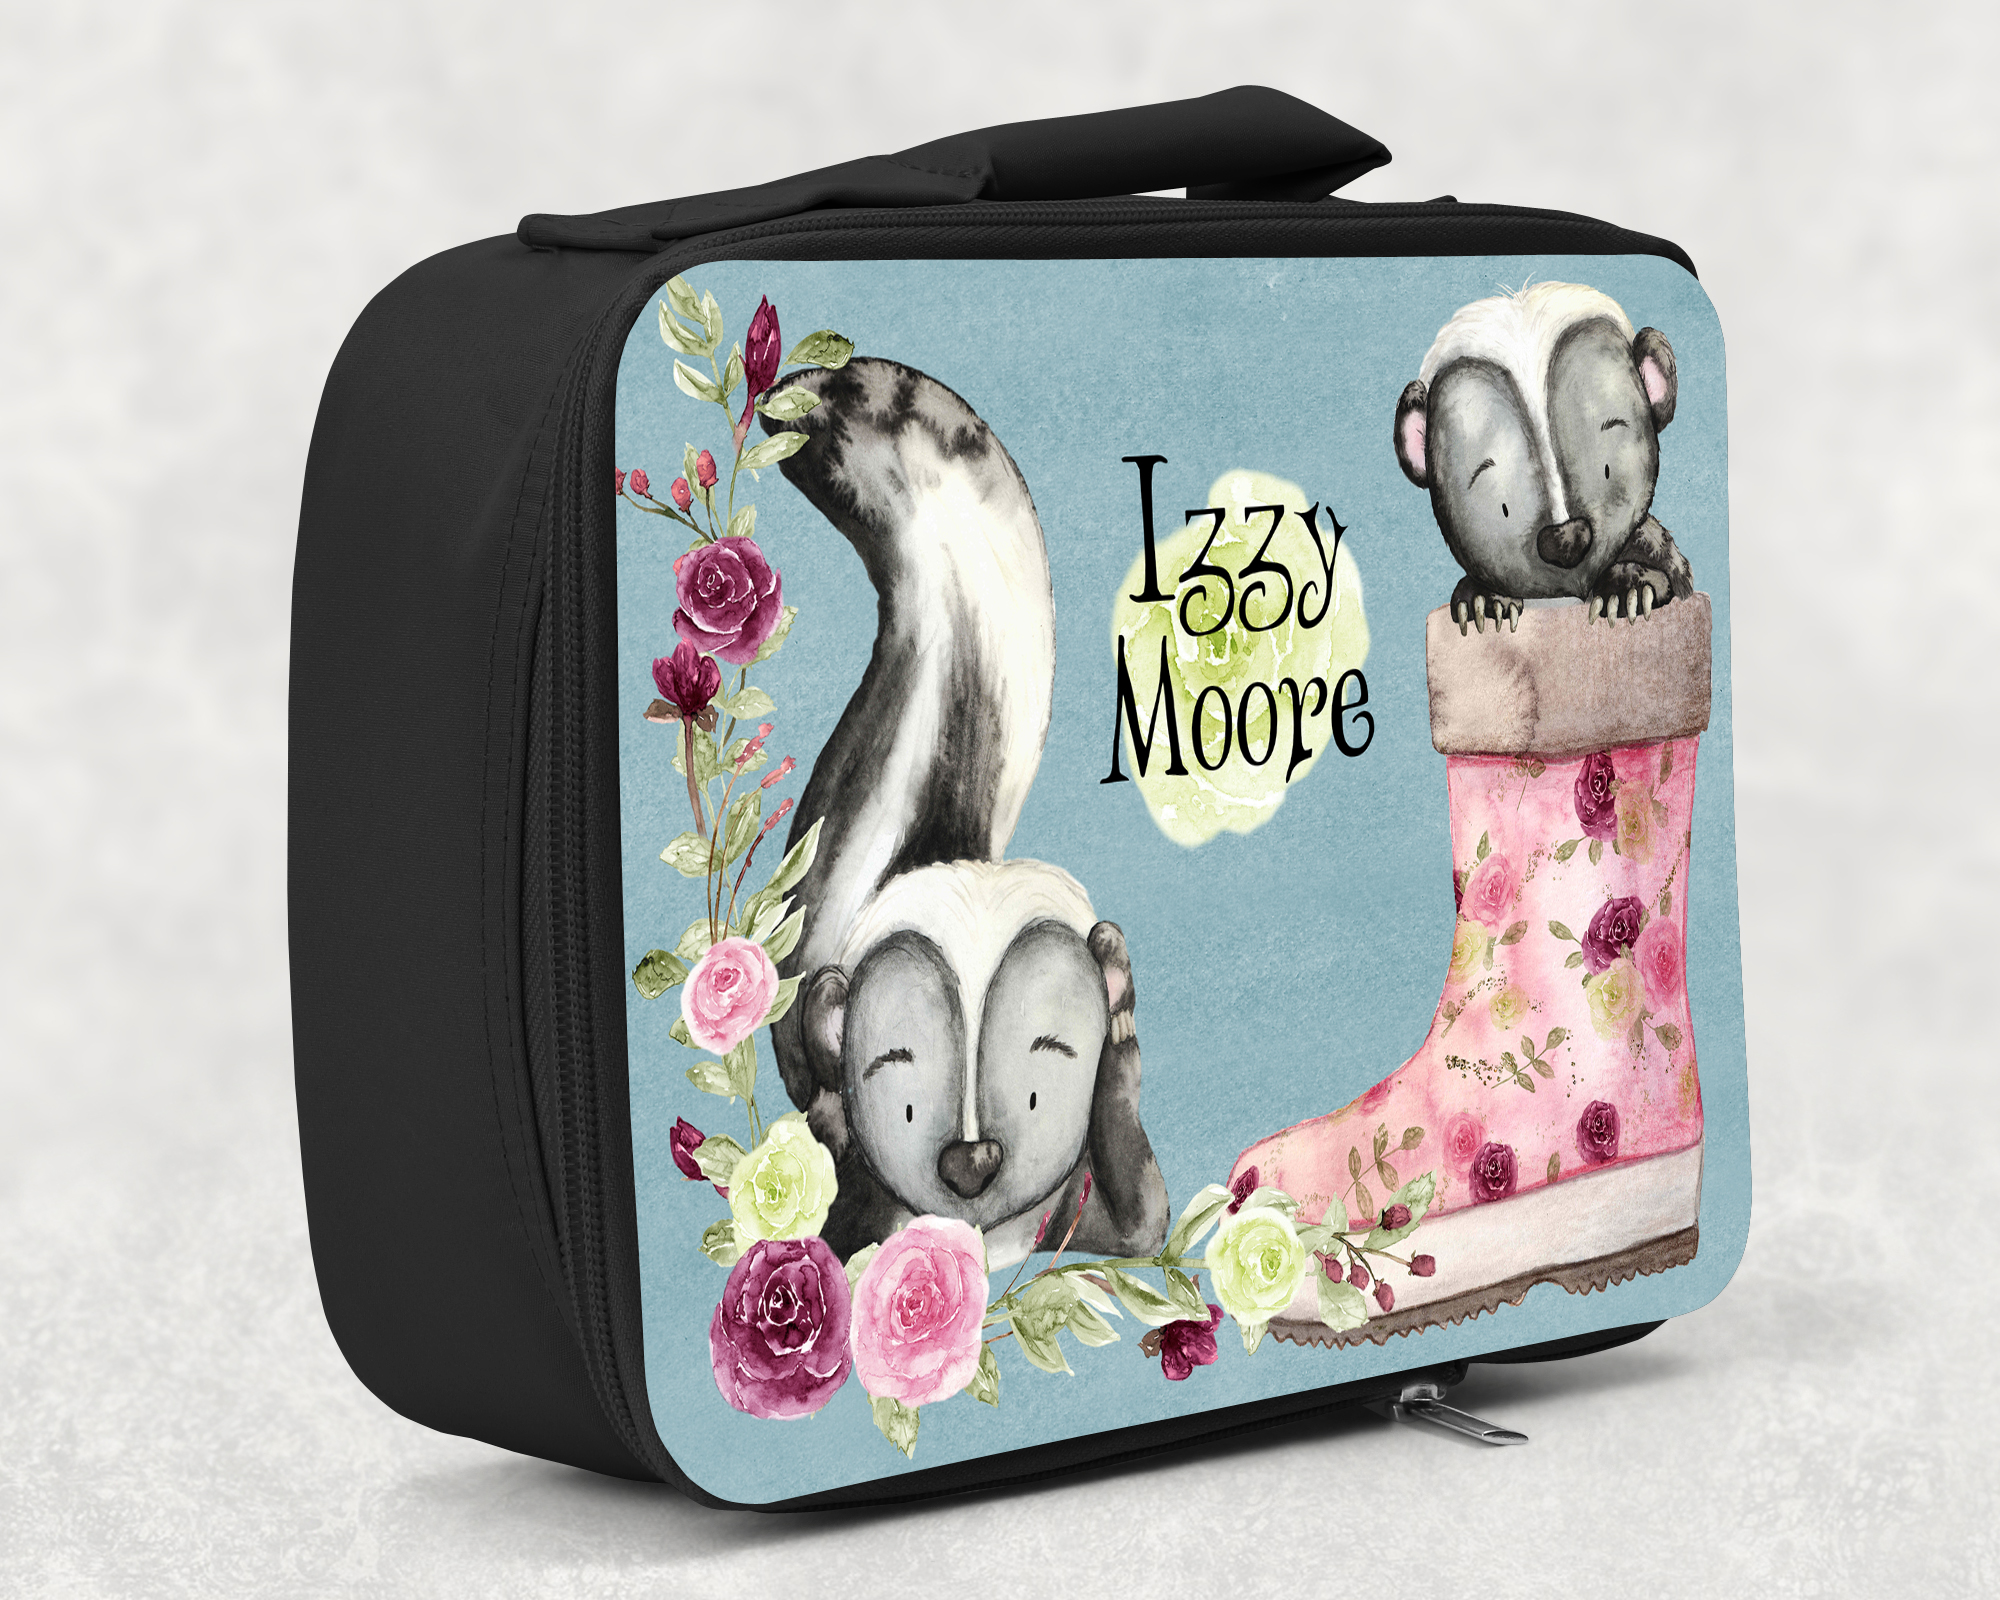 children's insulated lunch bag with bright colourful personalised printed design in cute girl skunk theme with flowers